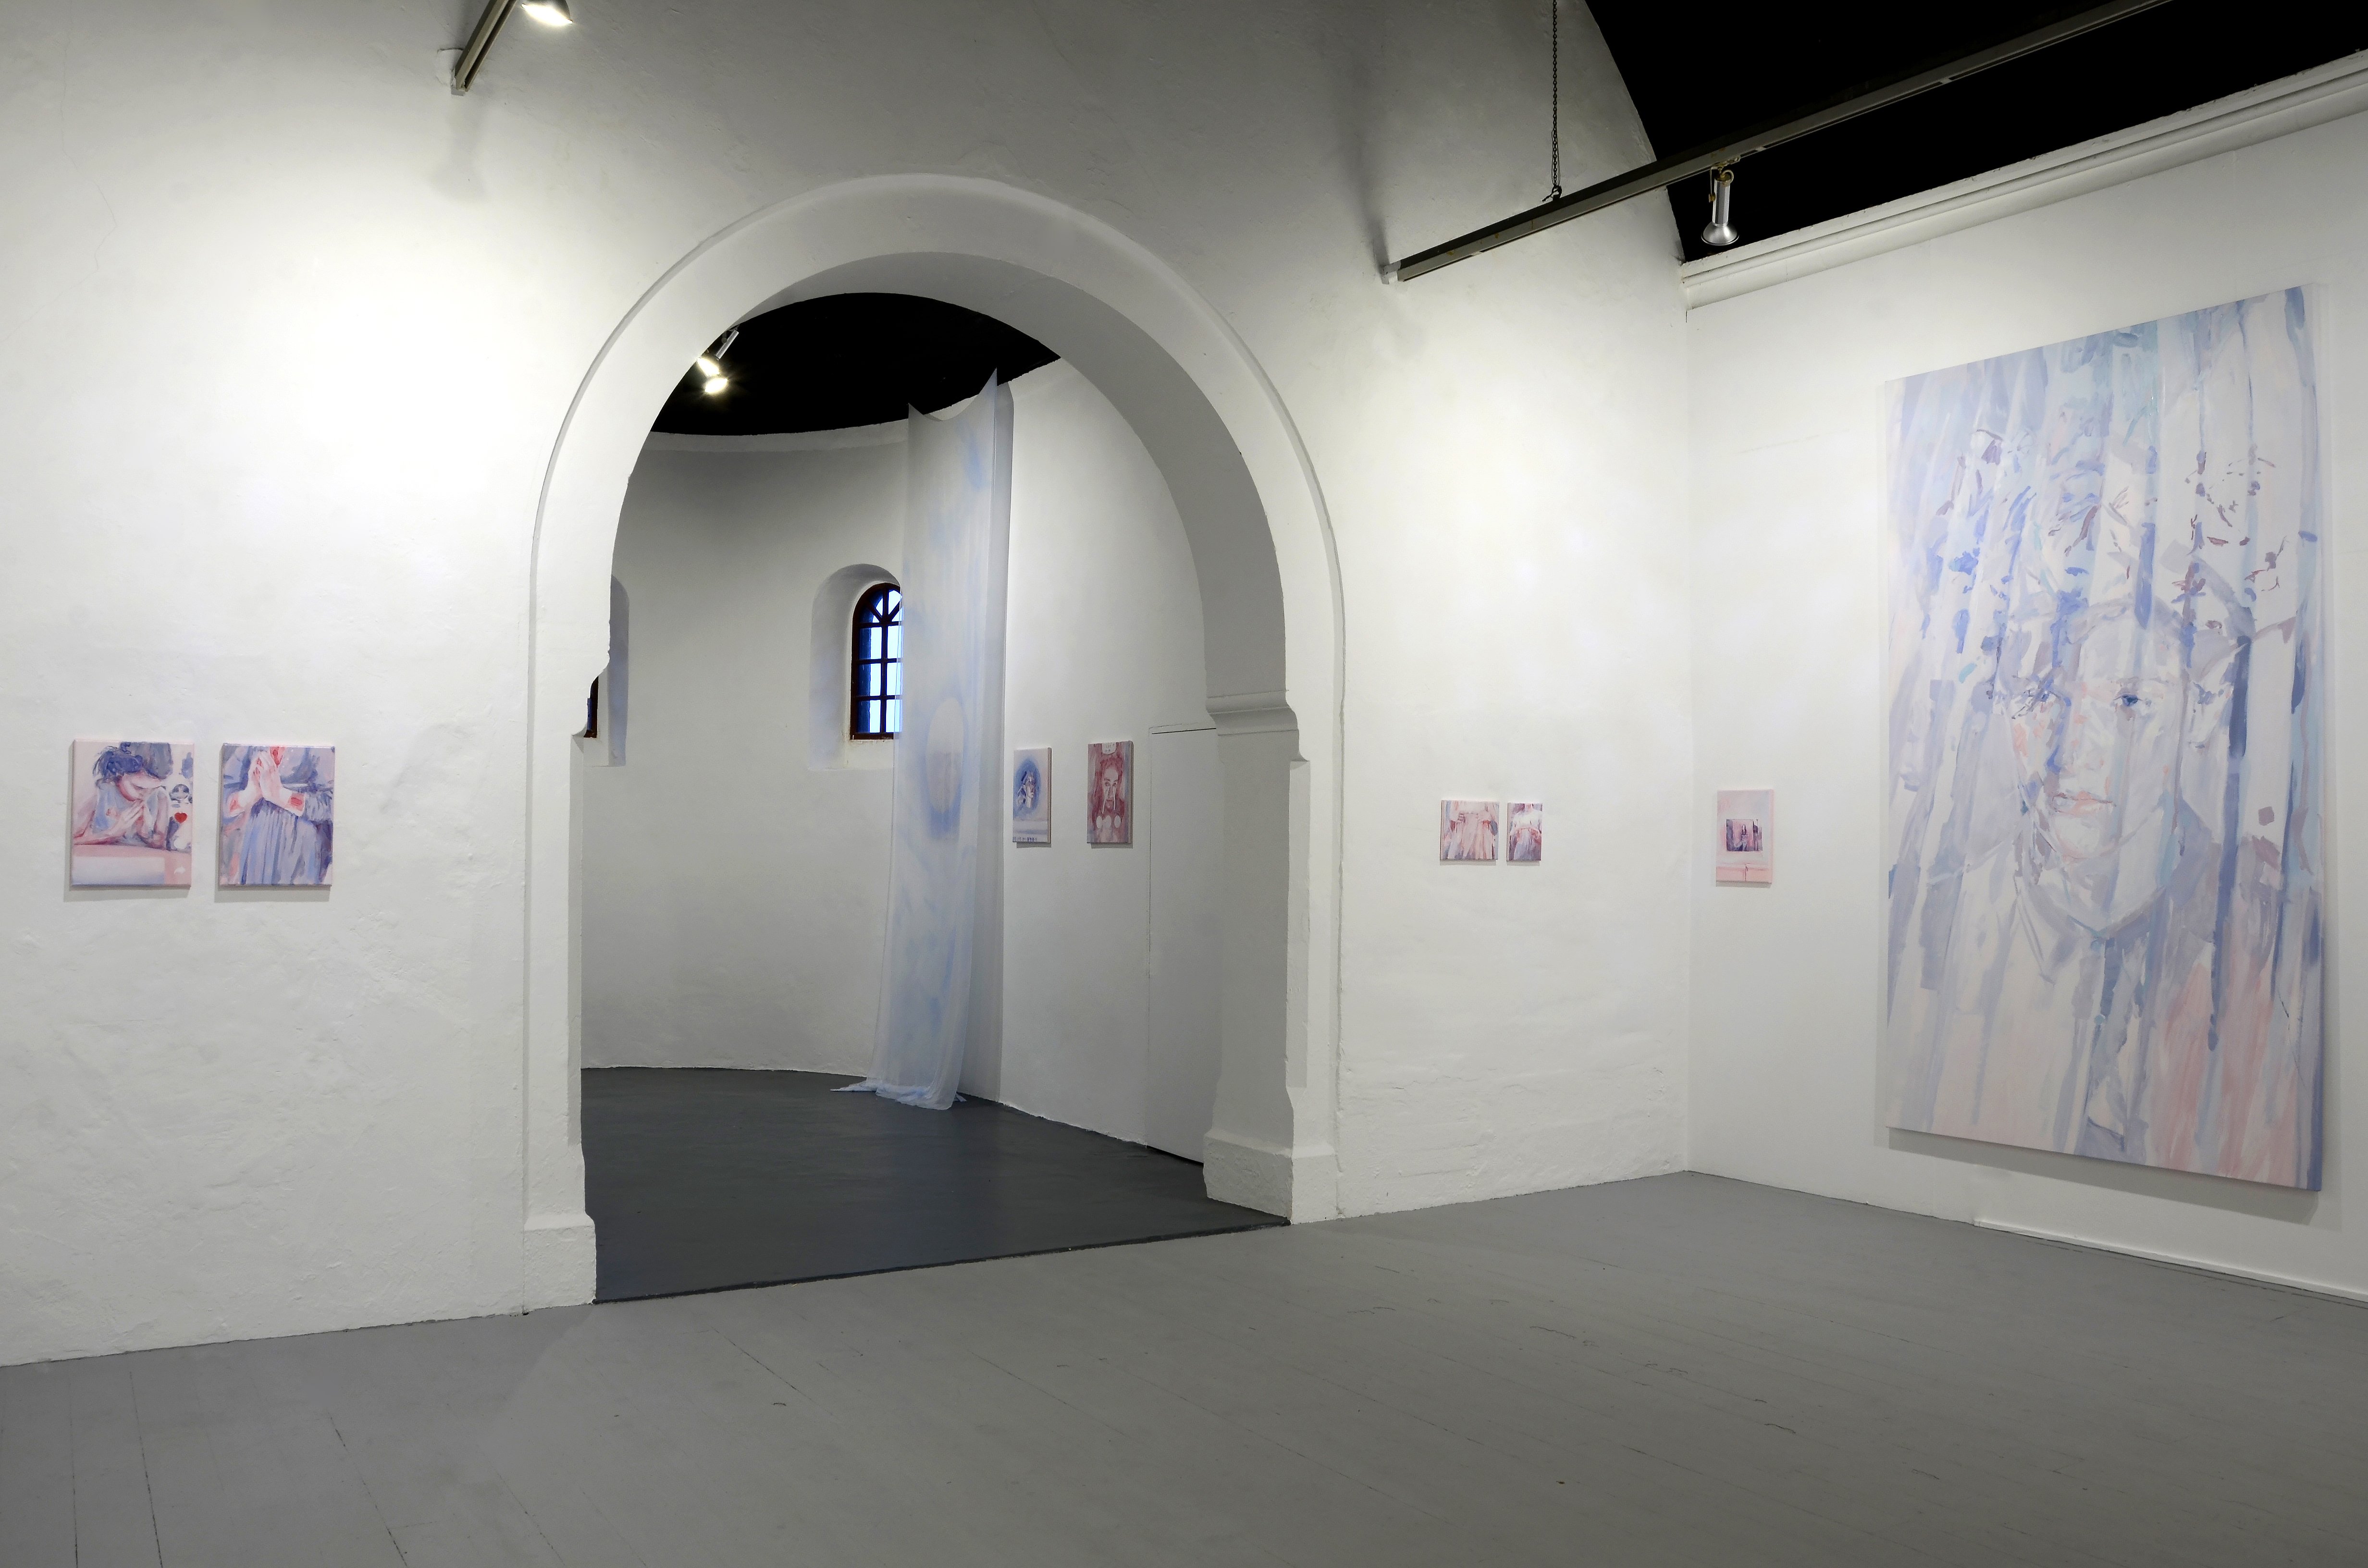 Come fail at love exhibition by Casper White. Image includes a large painting painted in muted pink and blue colours. The image includes a portrait of a young man, from shoulders upwards. The canvas has soft painted vertical pleating across the figure.